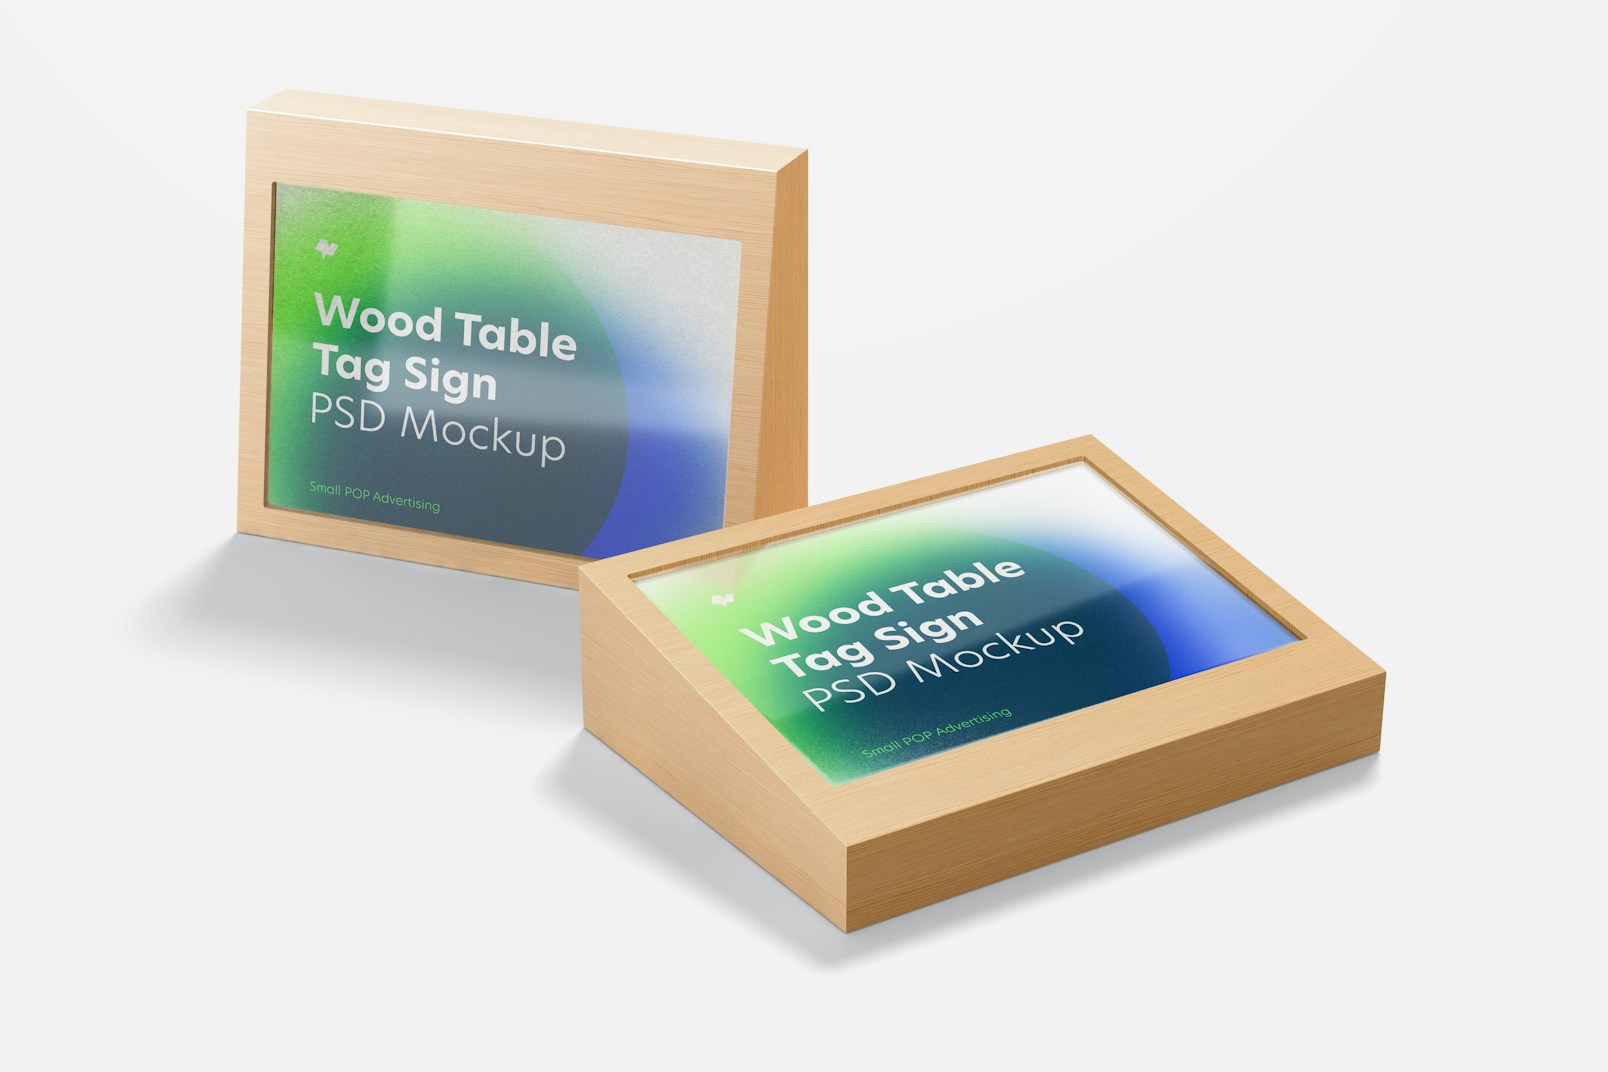 Wood Table Advertising Tag Signs Mockup, Perspective